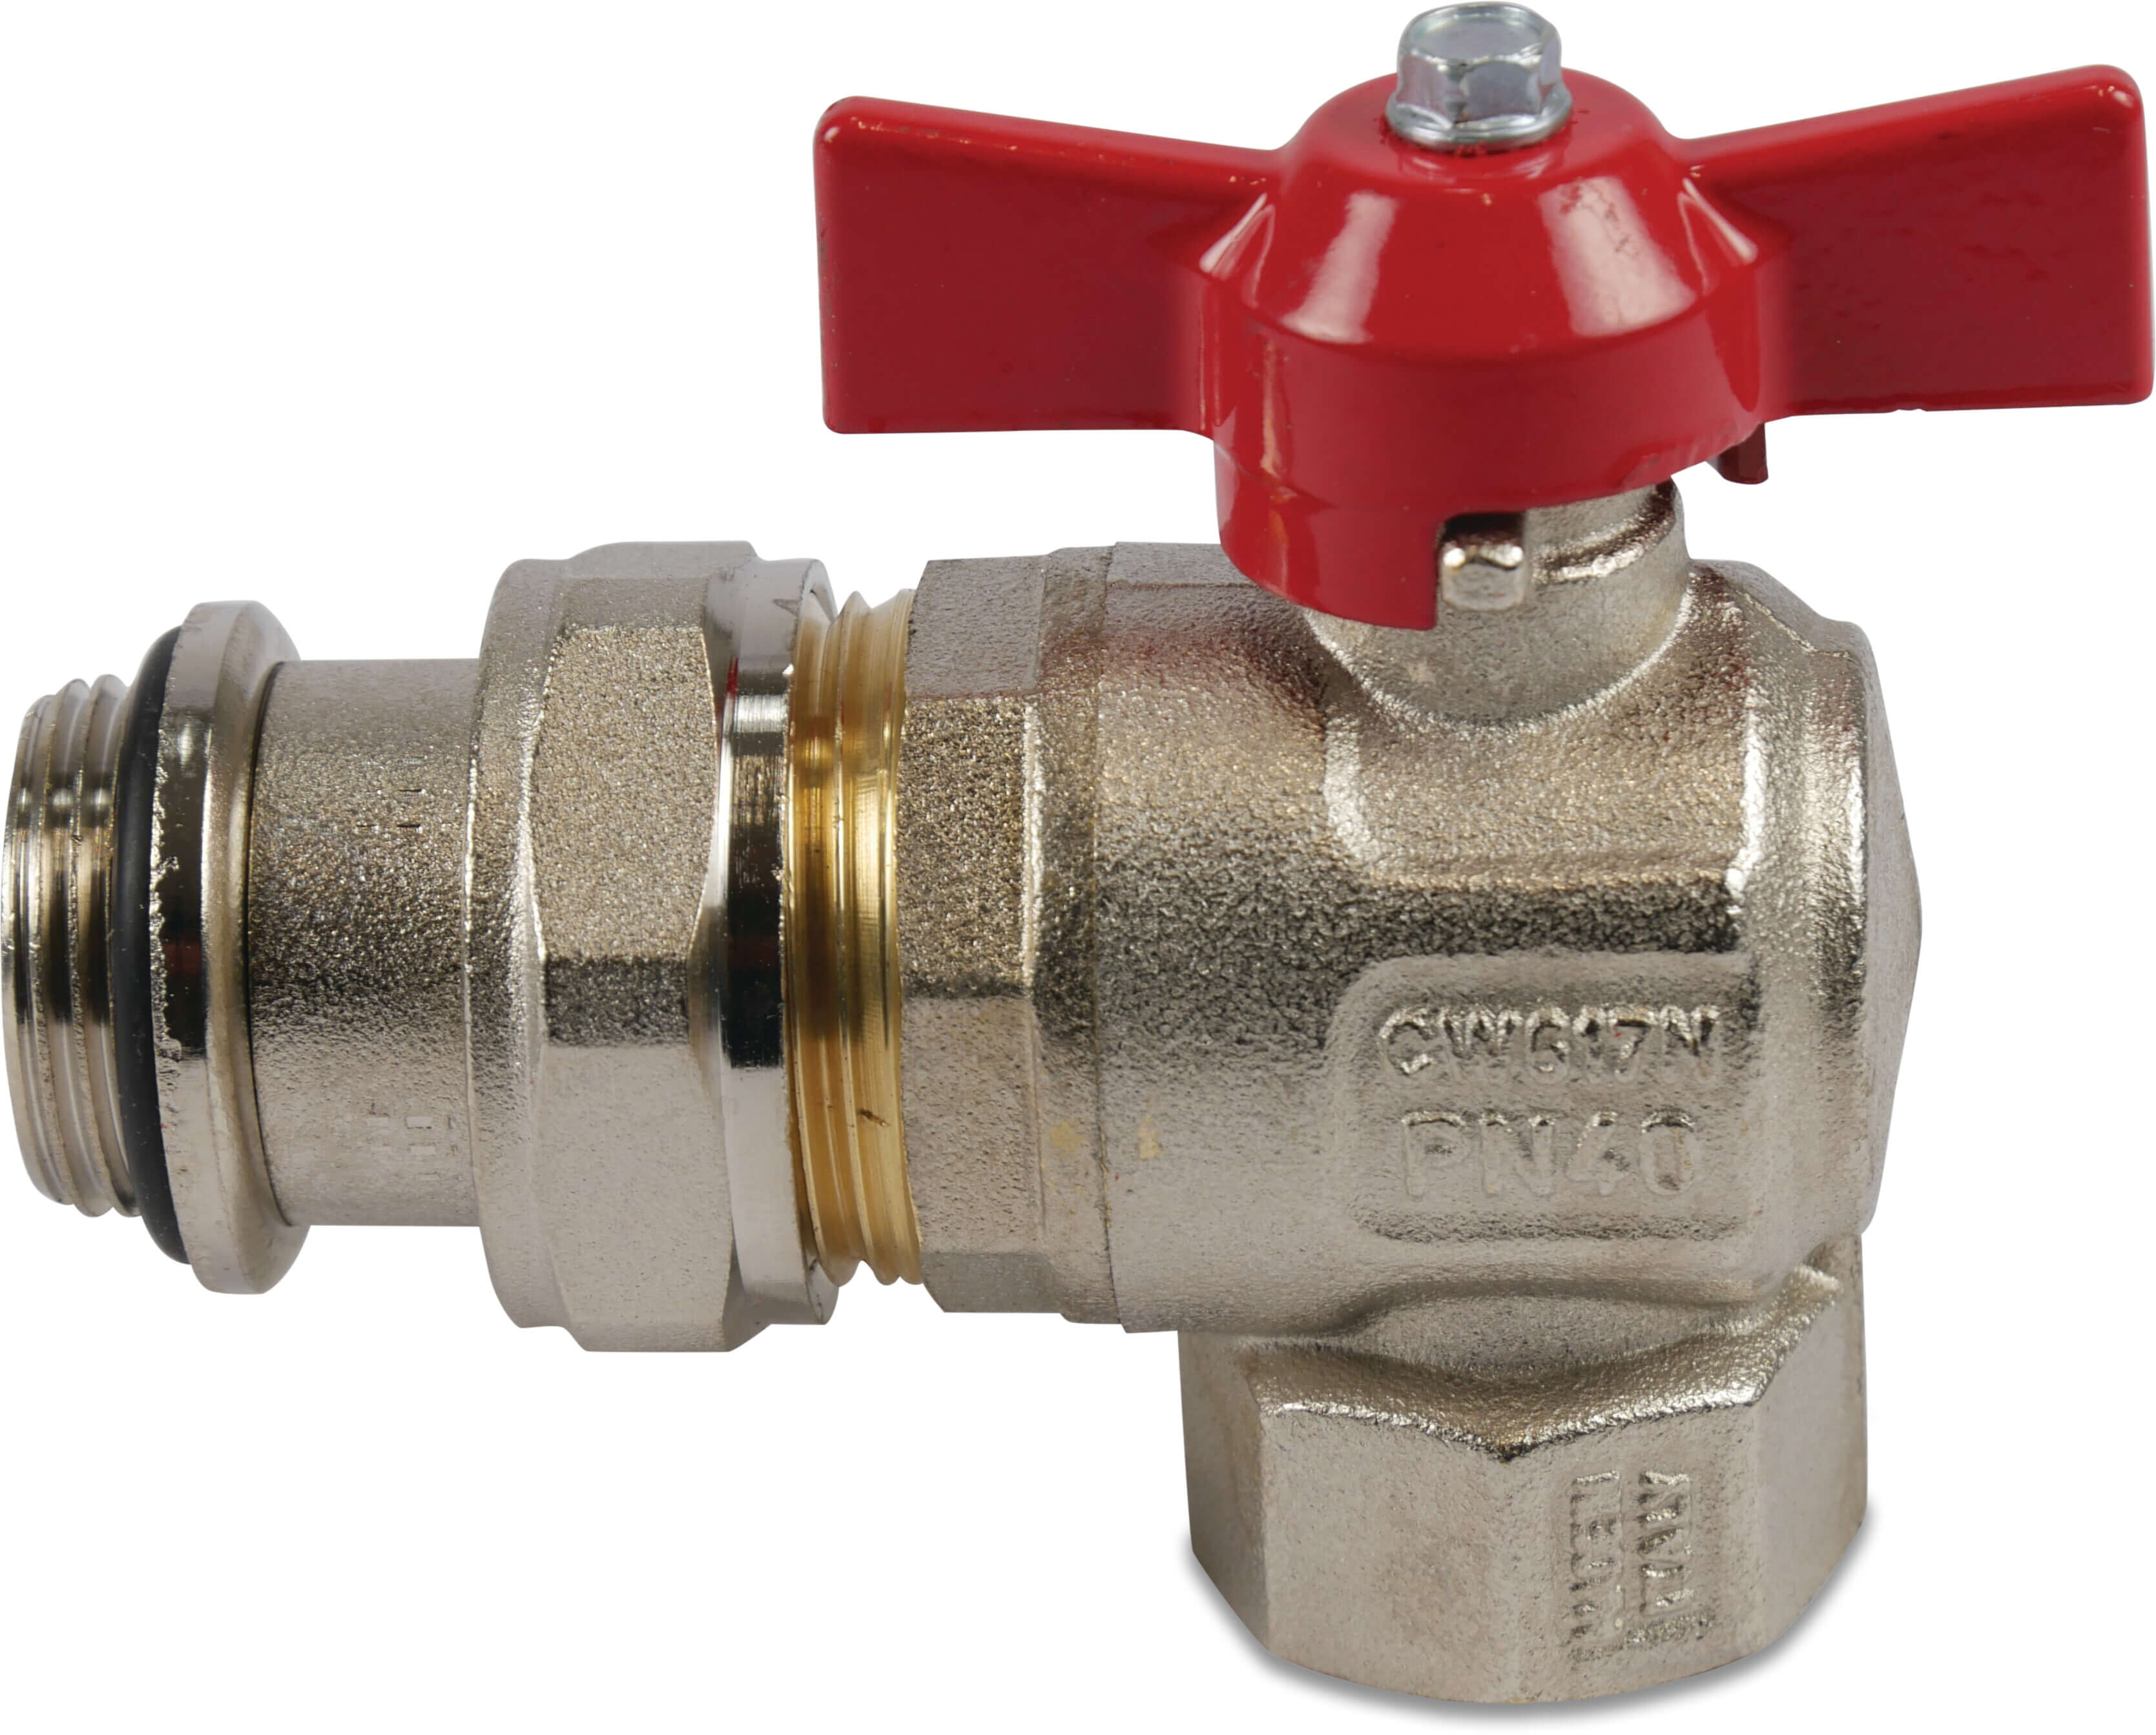 Itap Angle ball valve with O-ring brass 3/4" male thread x female thread 40bar type 298